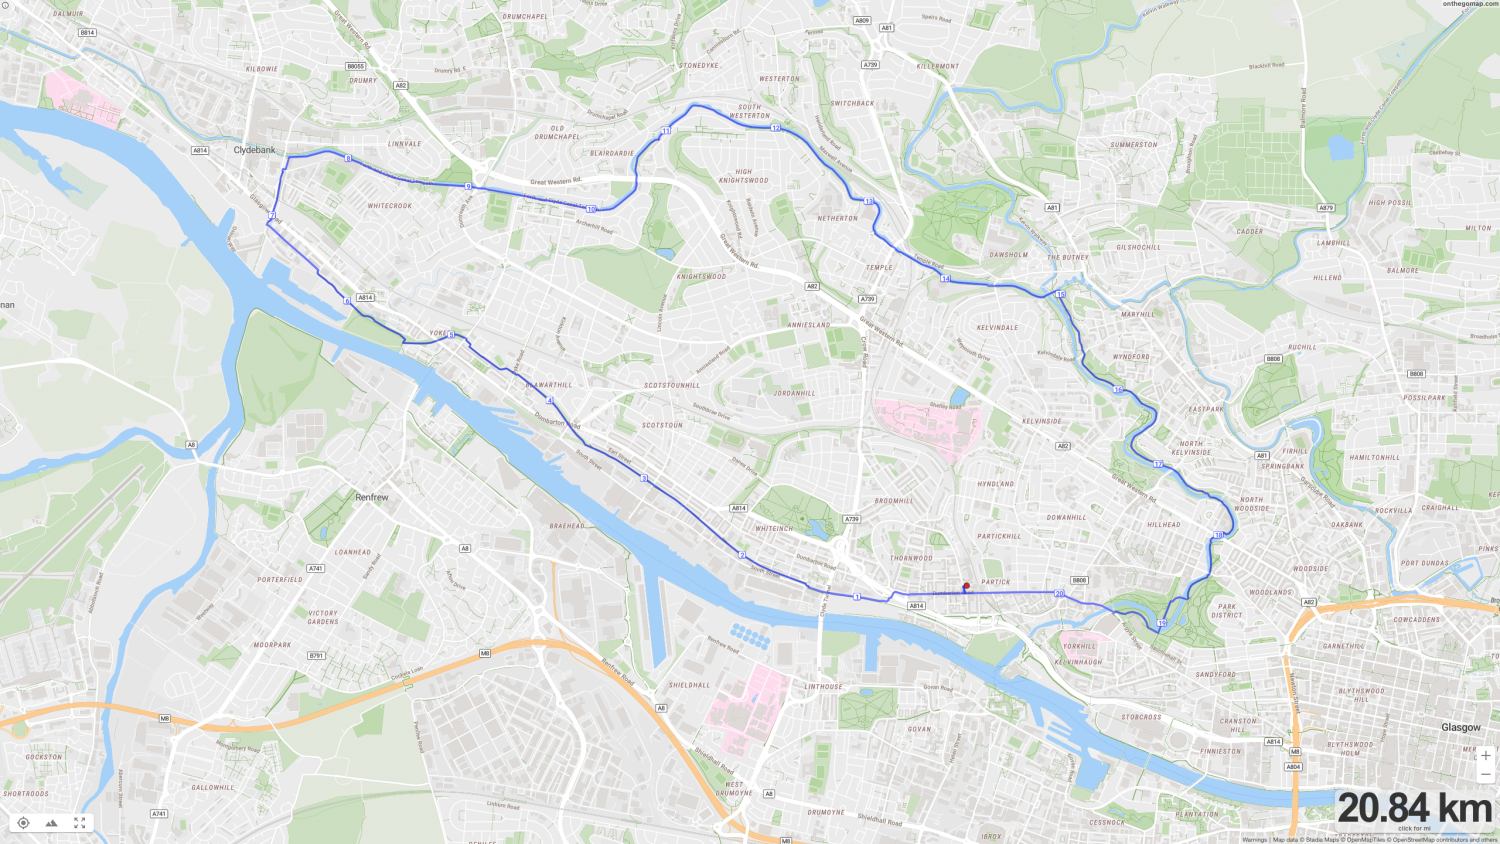 West End Glasgow, Clydebank, Forth & Clyde Canal Running Route